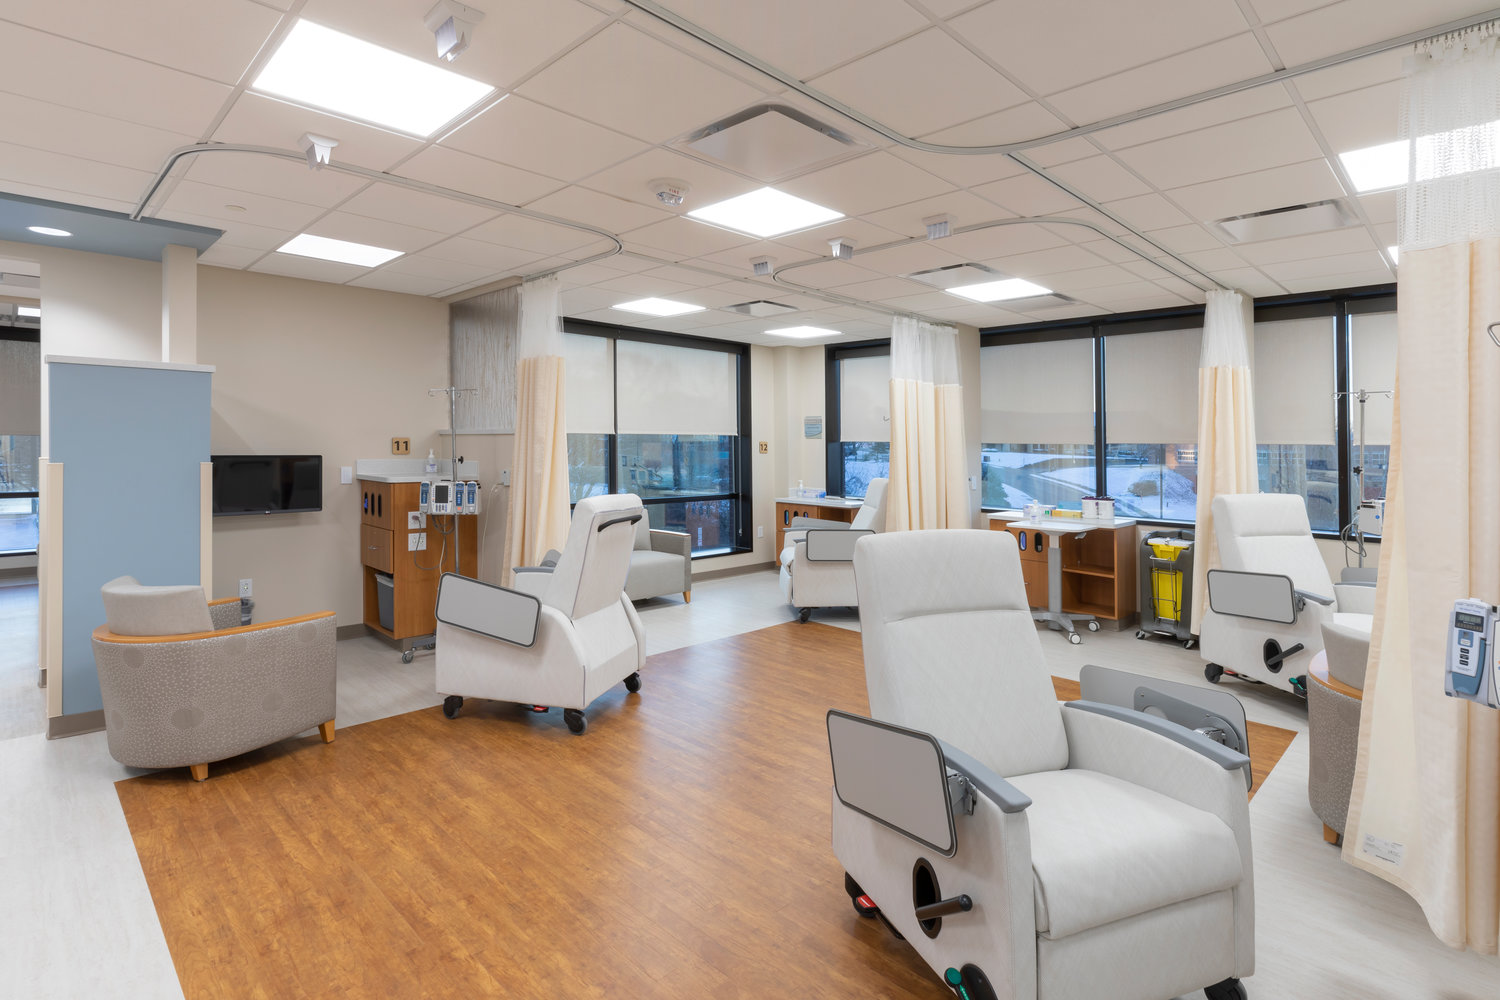 The Sue Dalton Chemotherapy Infusion Center brings treatment chairs up to 44.